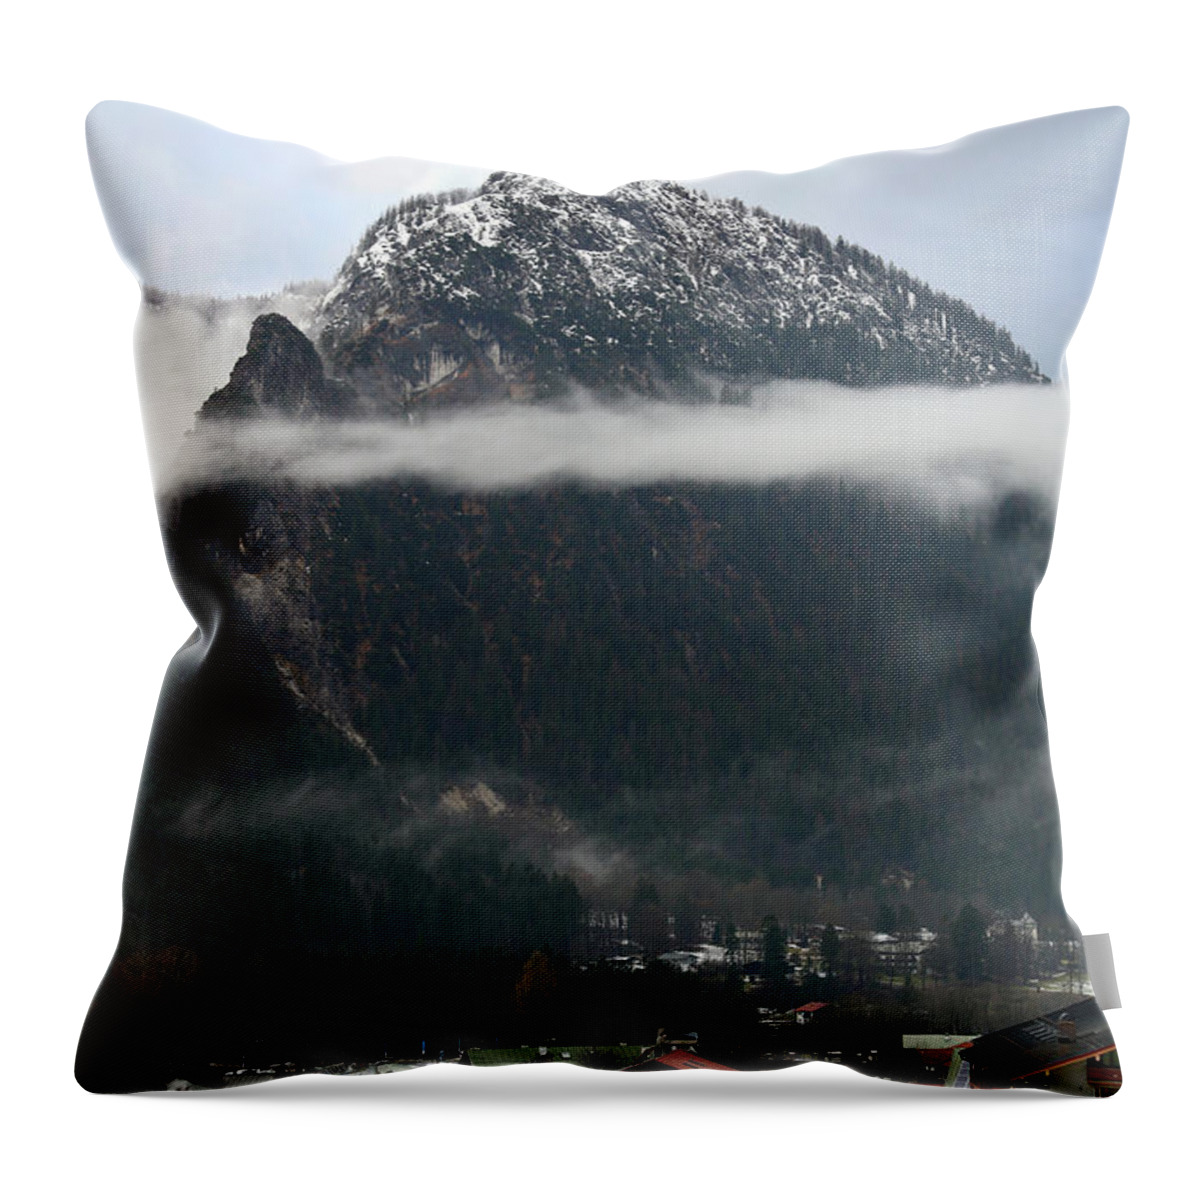 Tranquility Throw Pillow featuring the photograph Snow Covered Mountain Konigssee Germany by Virginia Star